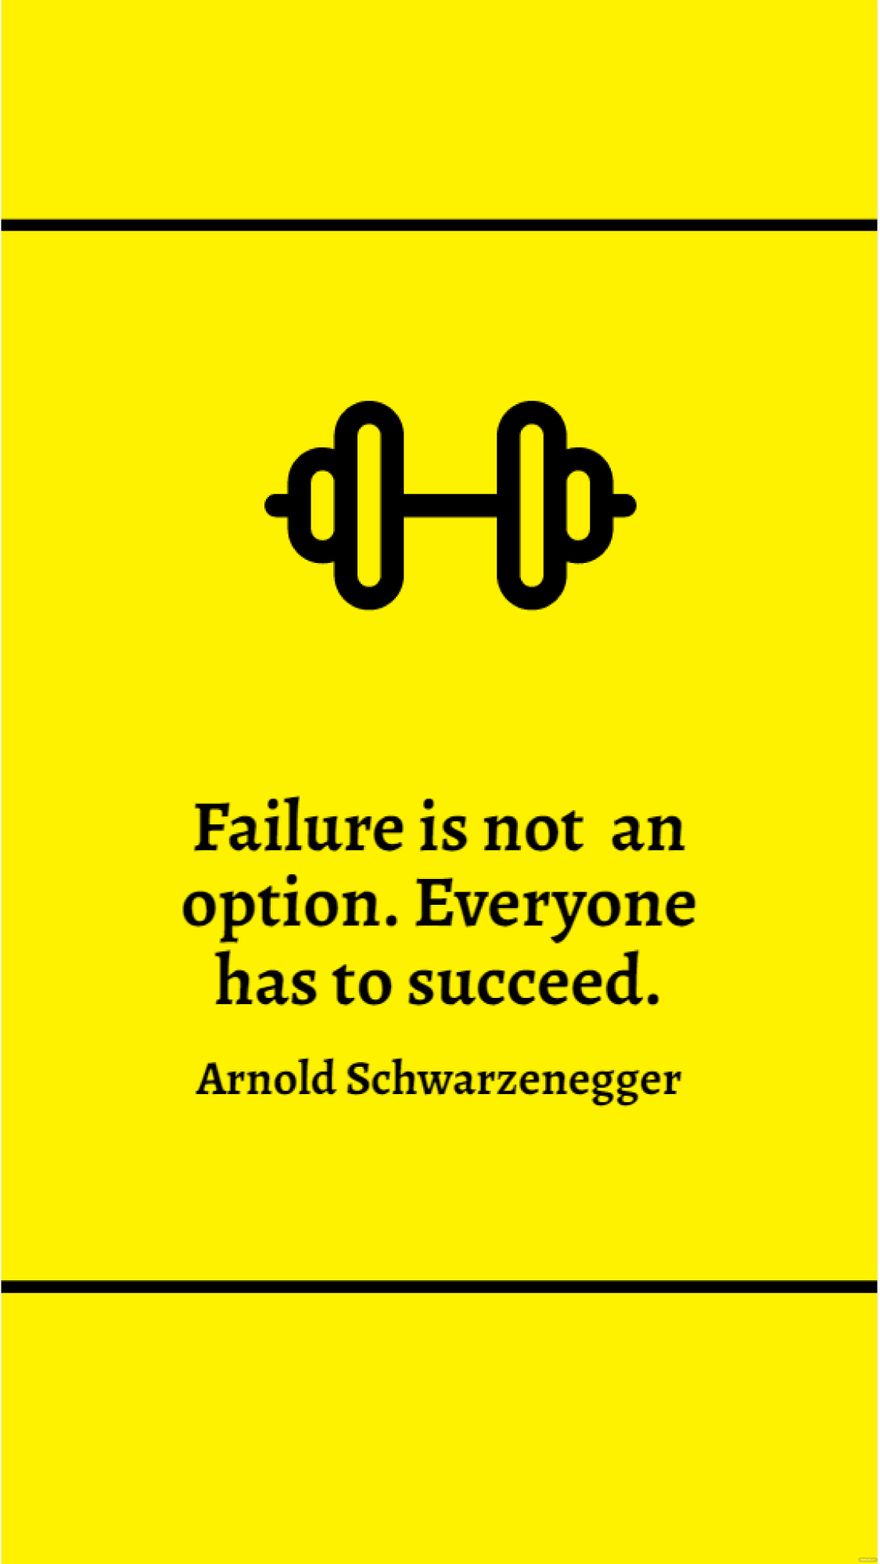 Arnold Schwarzenegger - Failure is not an option. Everyone has to succeed. in JPG